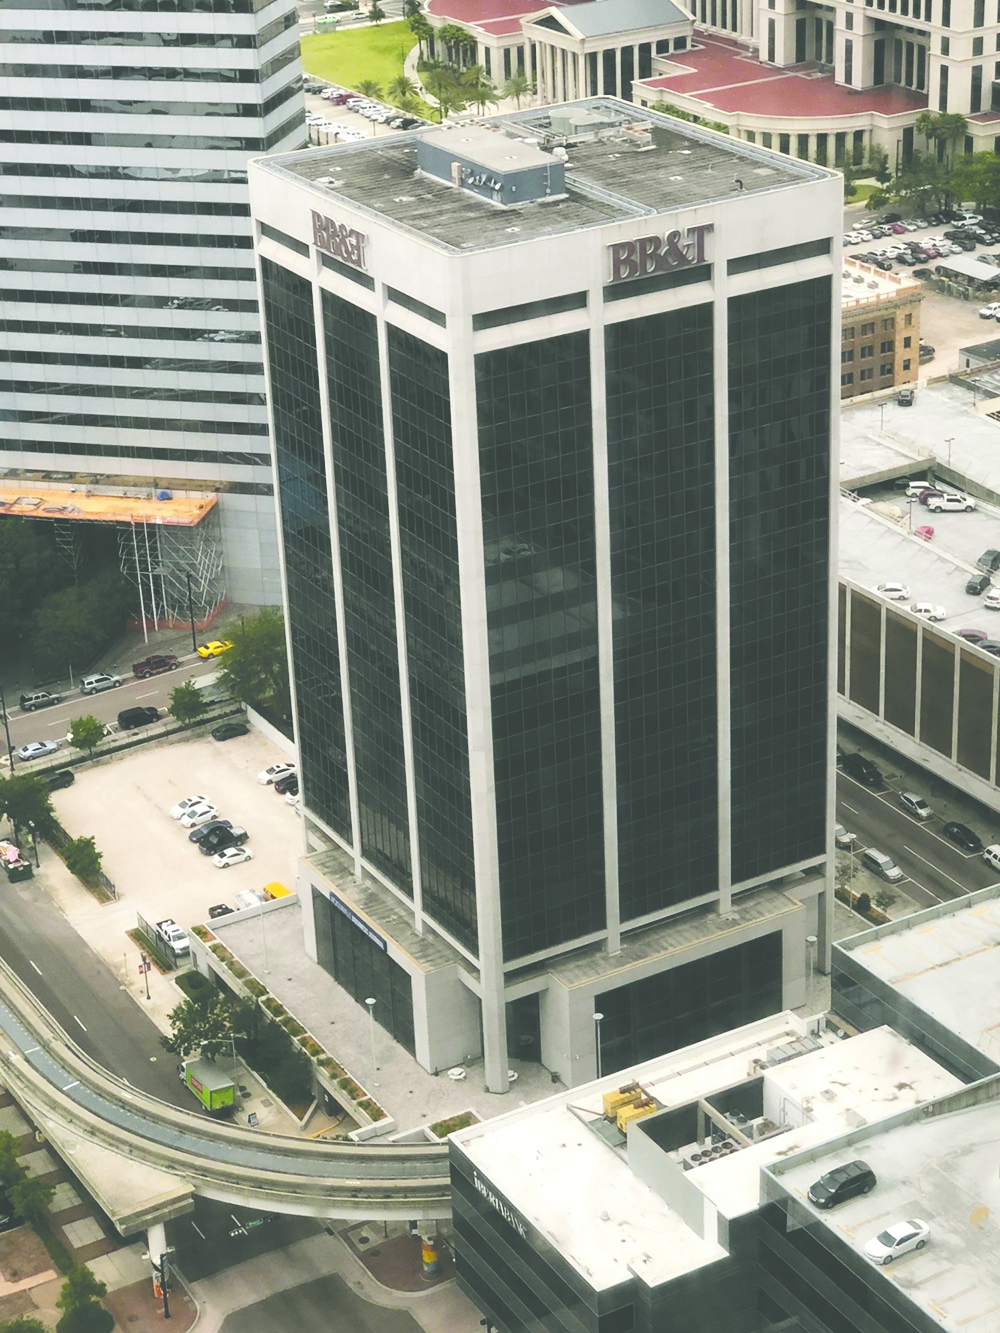 BB&T Tower